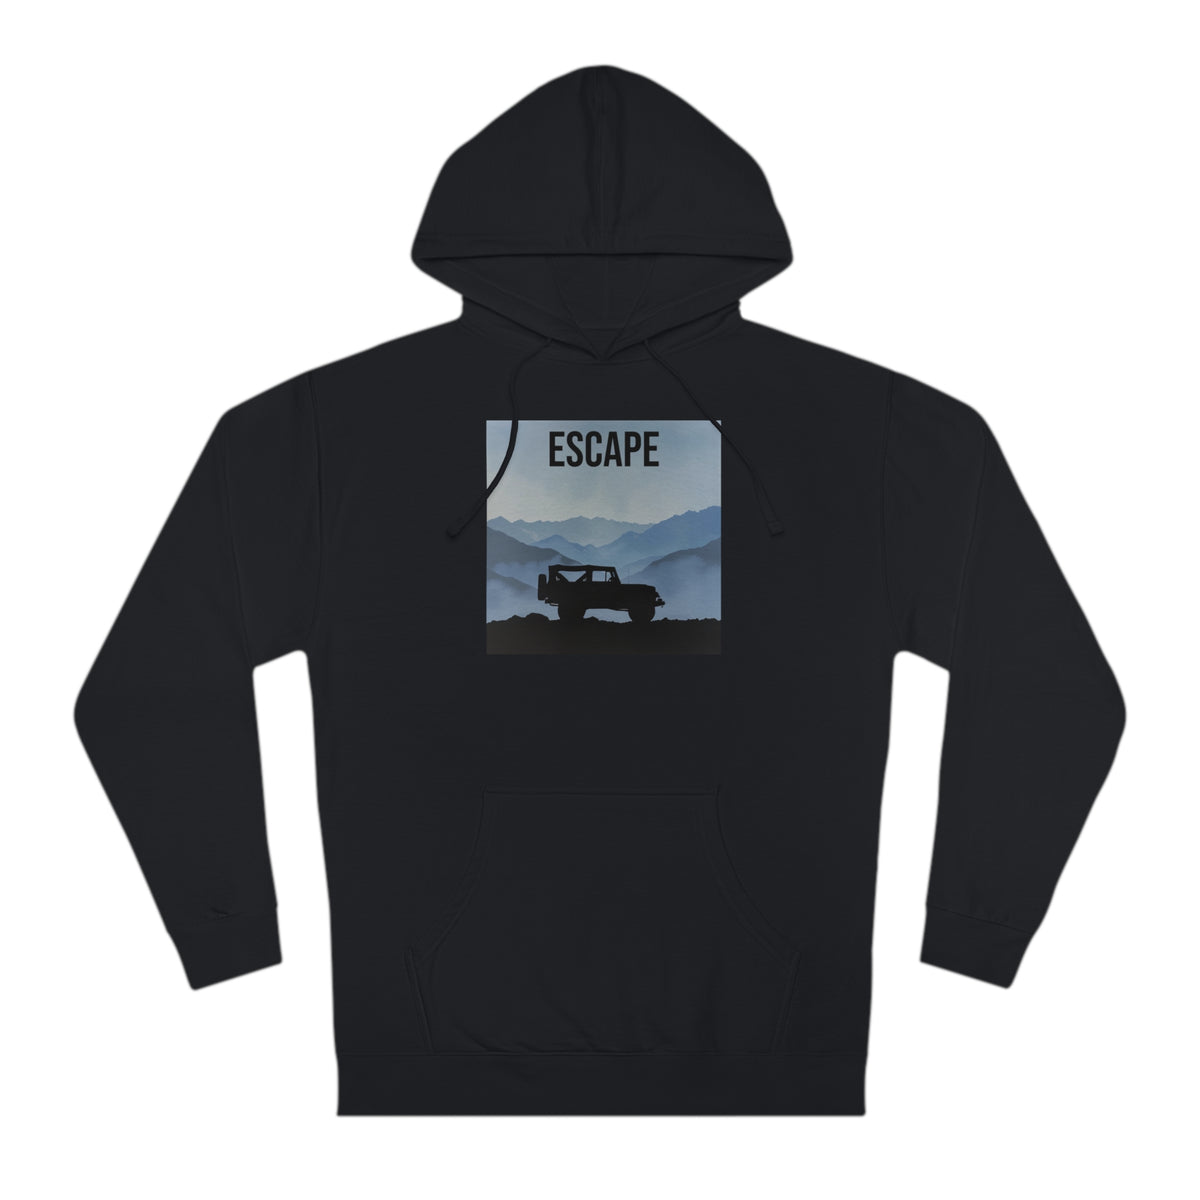 Mountain Escape Men's Hoodie with Silhouette Jeep Graphic Hooded Sweatshirt